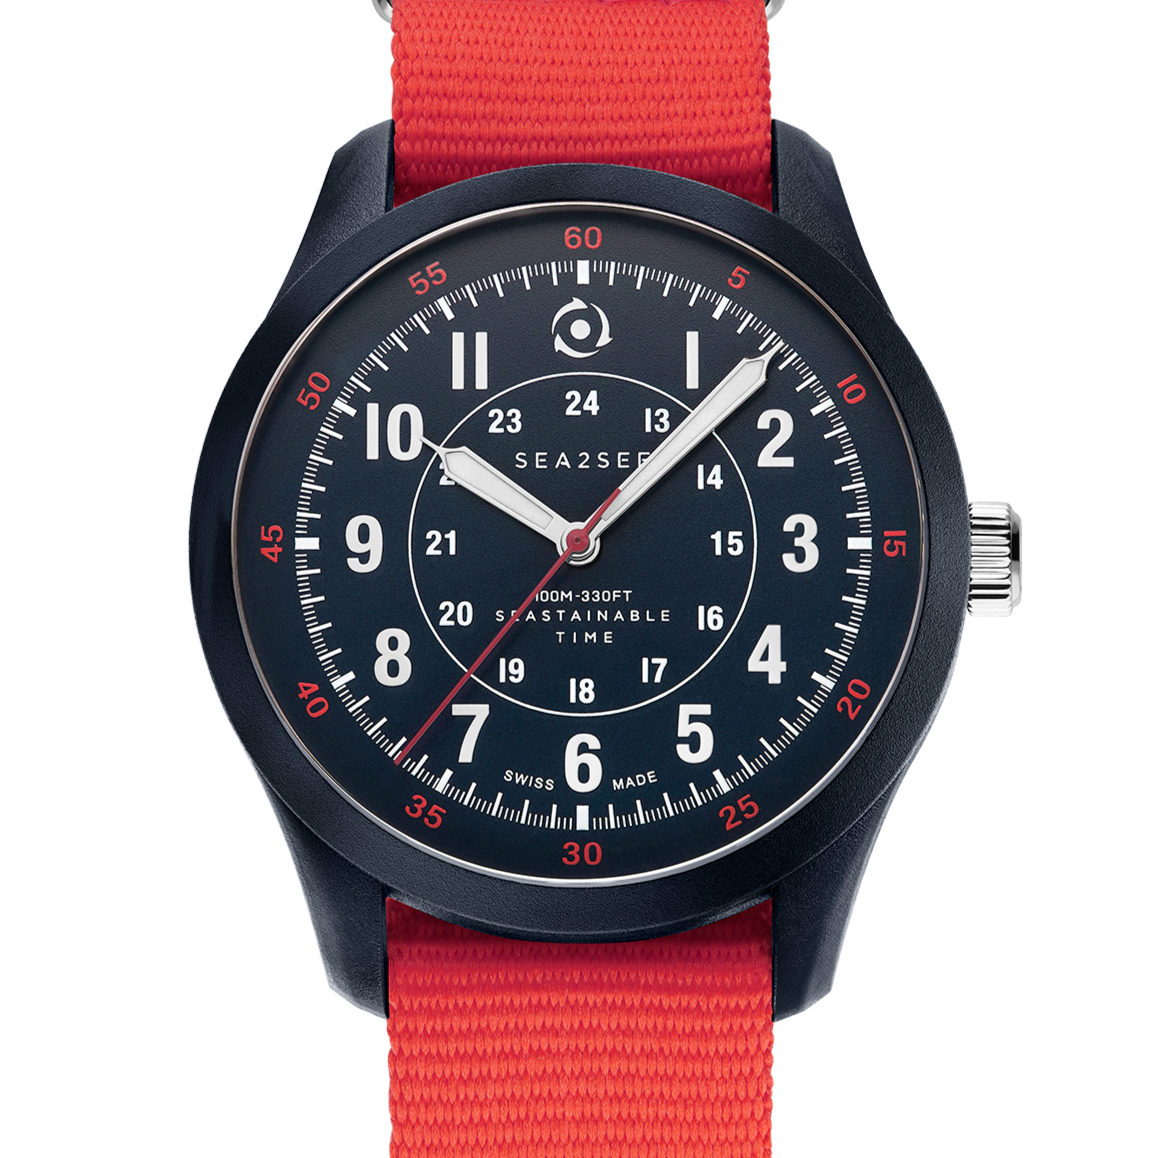 CASE: NAVY BLUE | STRAP: RED | DIAL: NAVY BLUE | SIZE: 41 MM